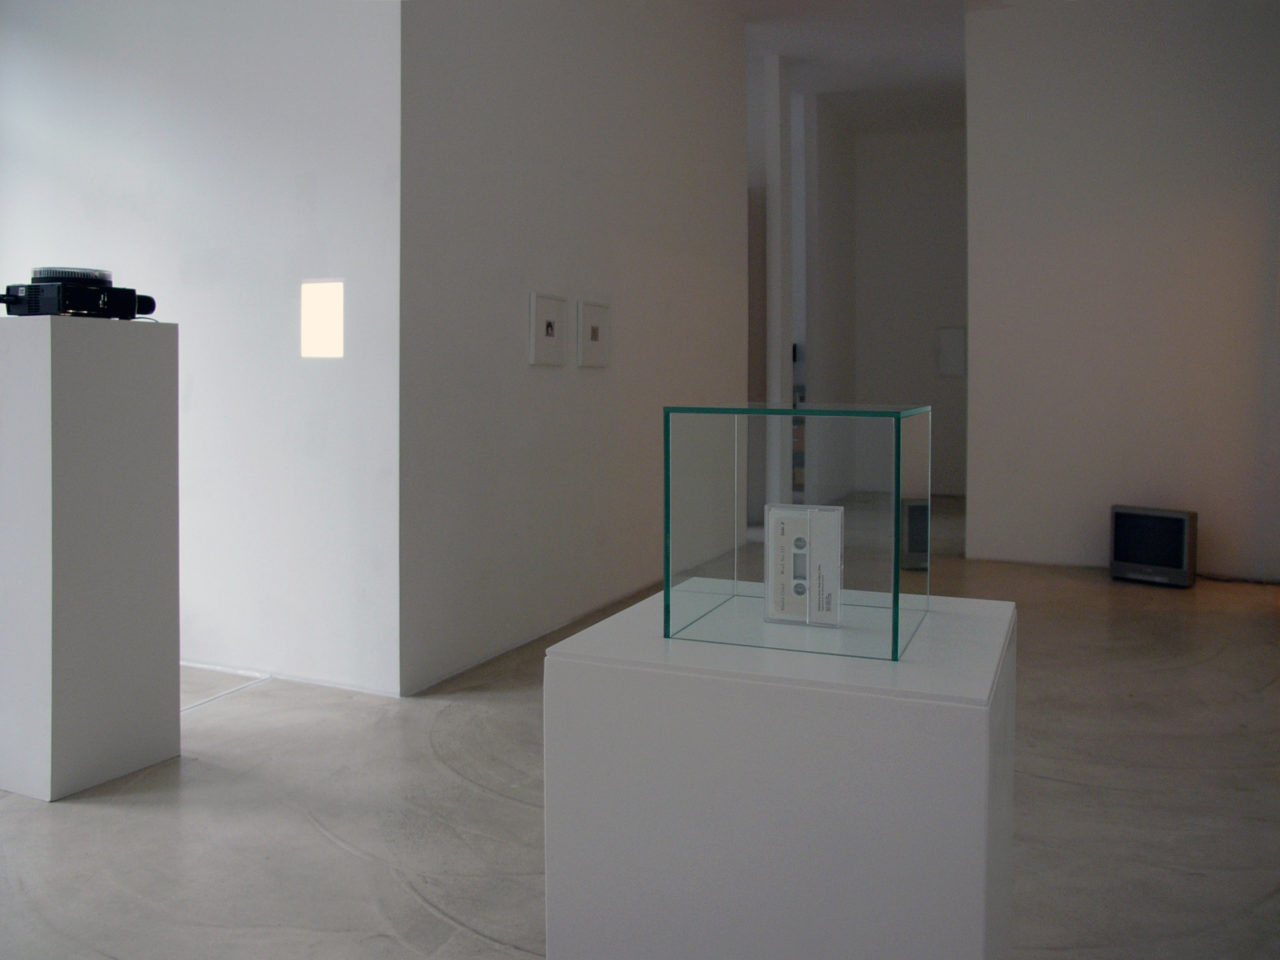 Sounds of silence, Installation view